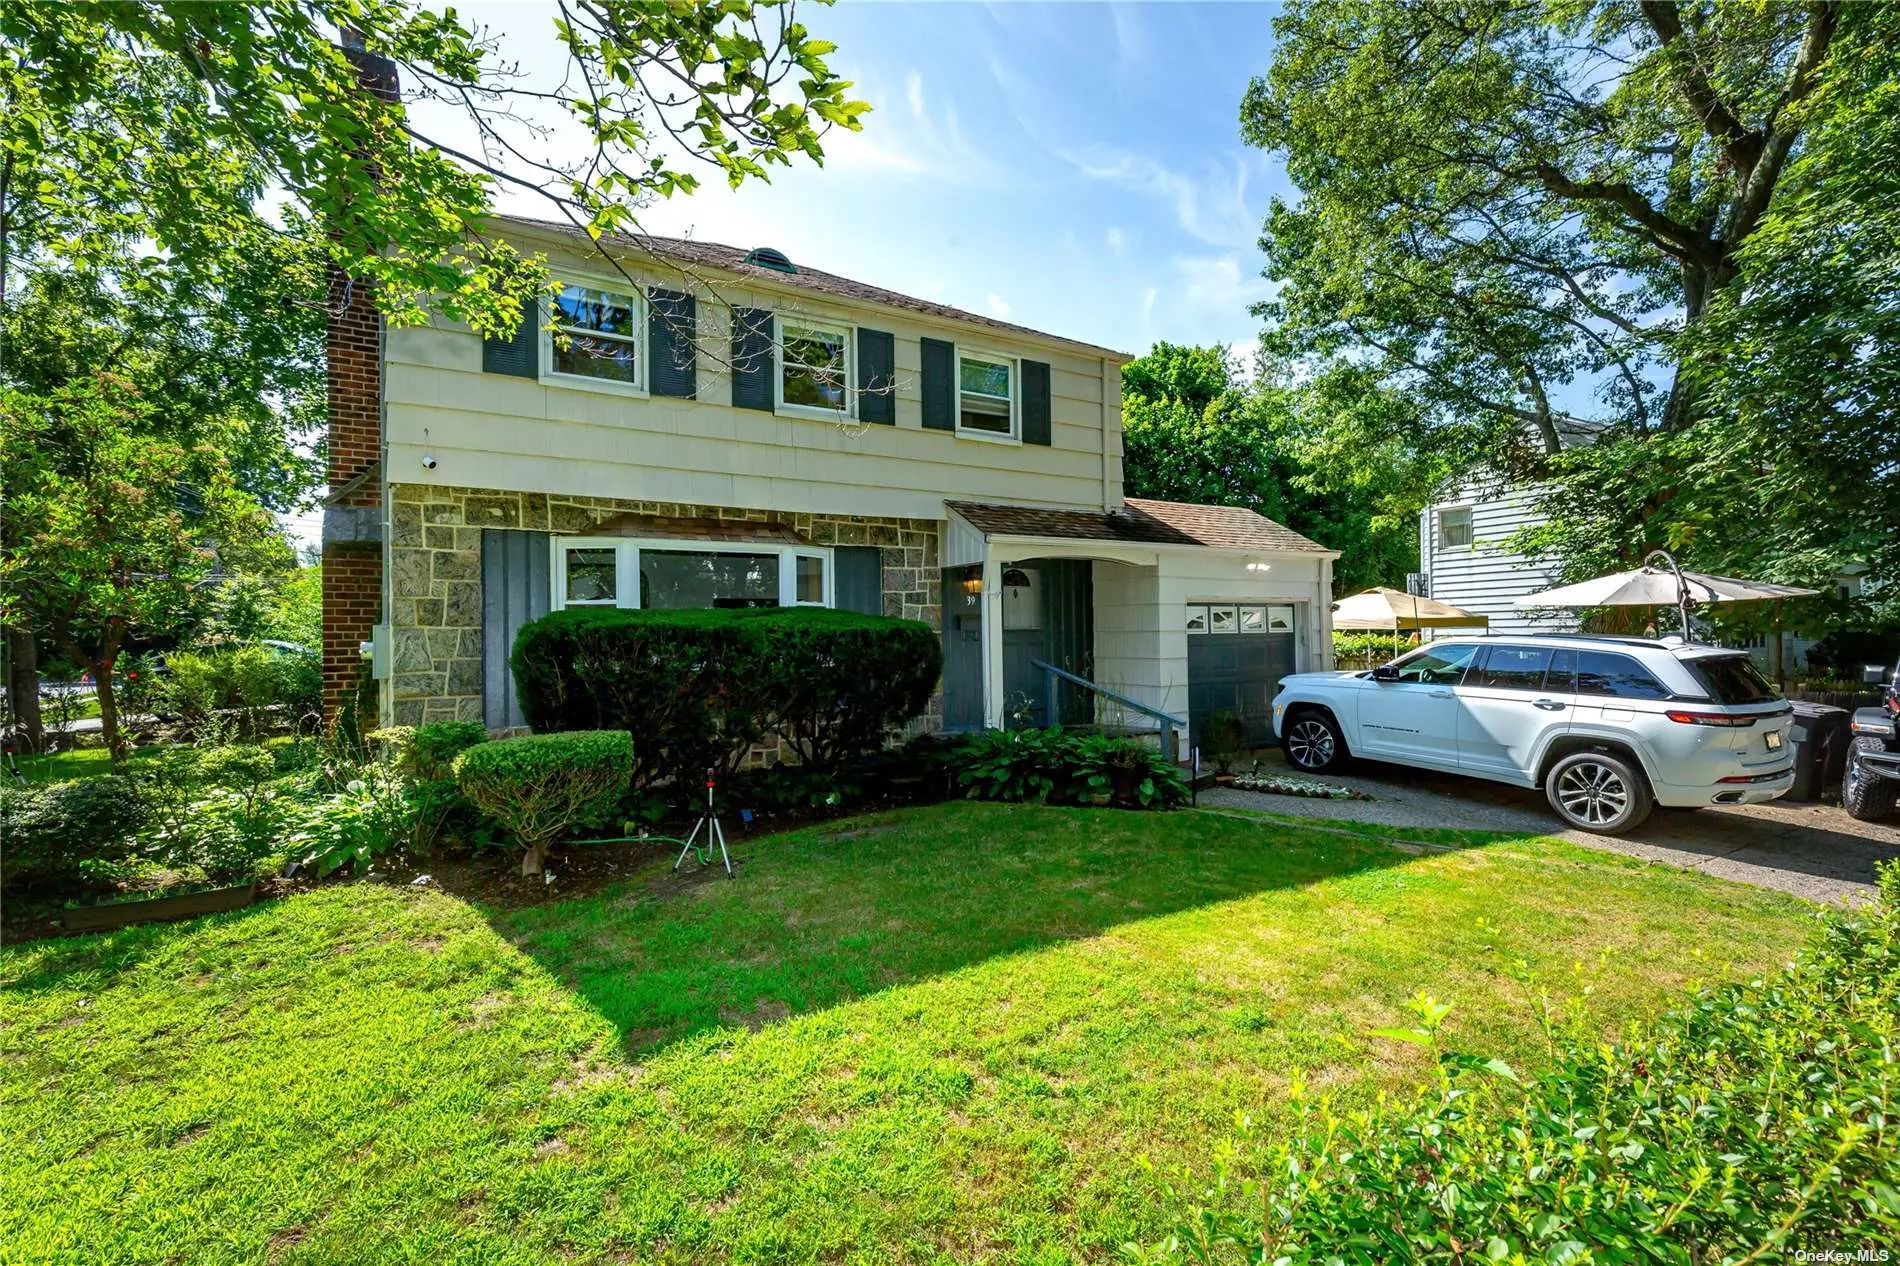 Won&rsquo;t last long! Lowest price on prestigious Kings Point Road, the most sought after location in Great Neck, walking distance to amenities no other community has: one block from Long Island Sound and famous Stepping Store Park with children pool+water park and marina access, resort like Parkway Pool Park, indoor skating rink, indoor and outdoor tennis courts, hiking park, and Great Neck Schools! 3 bedrooms 2 bathrooms 1 attached garage, many recent updates, plus a bonus bedroom in the basement, large corner lot. It&rsquo;s ready for a family with high quality living in mind.